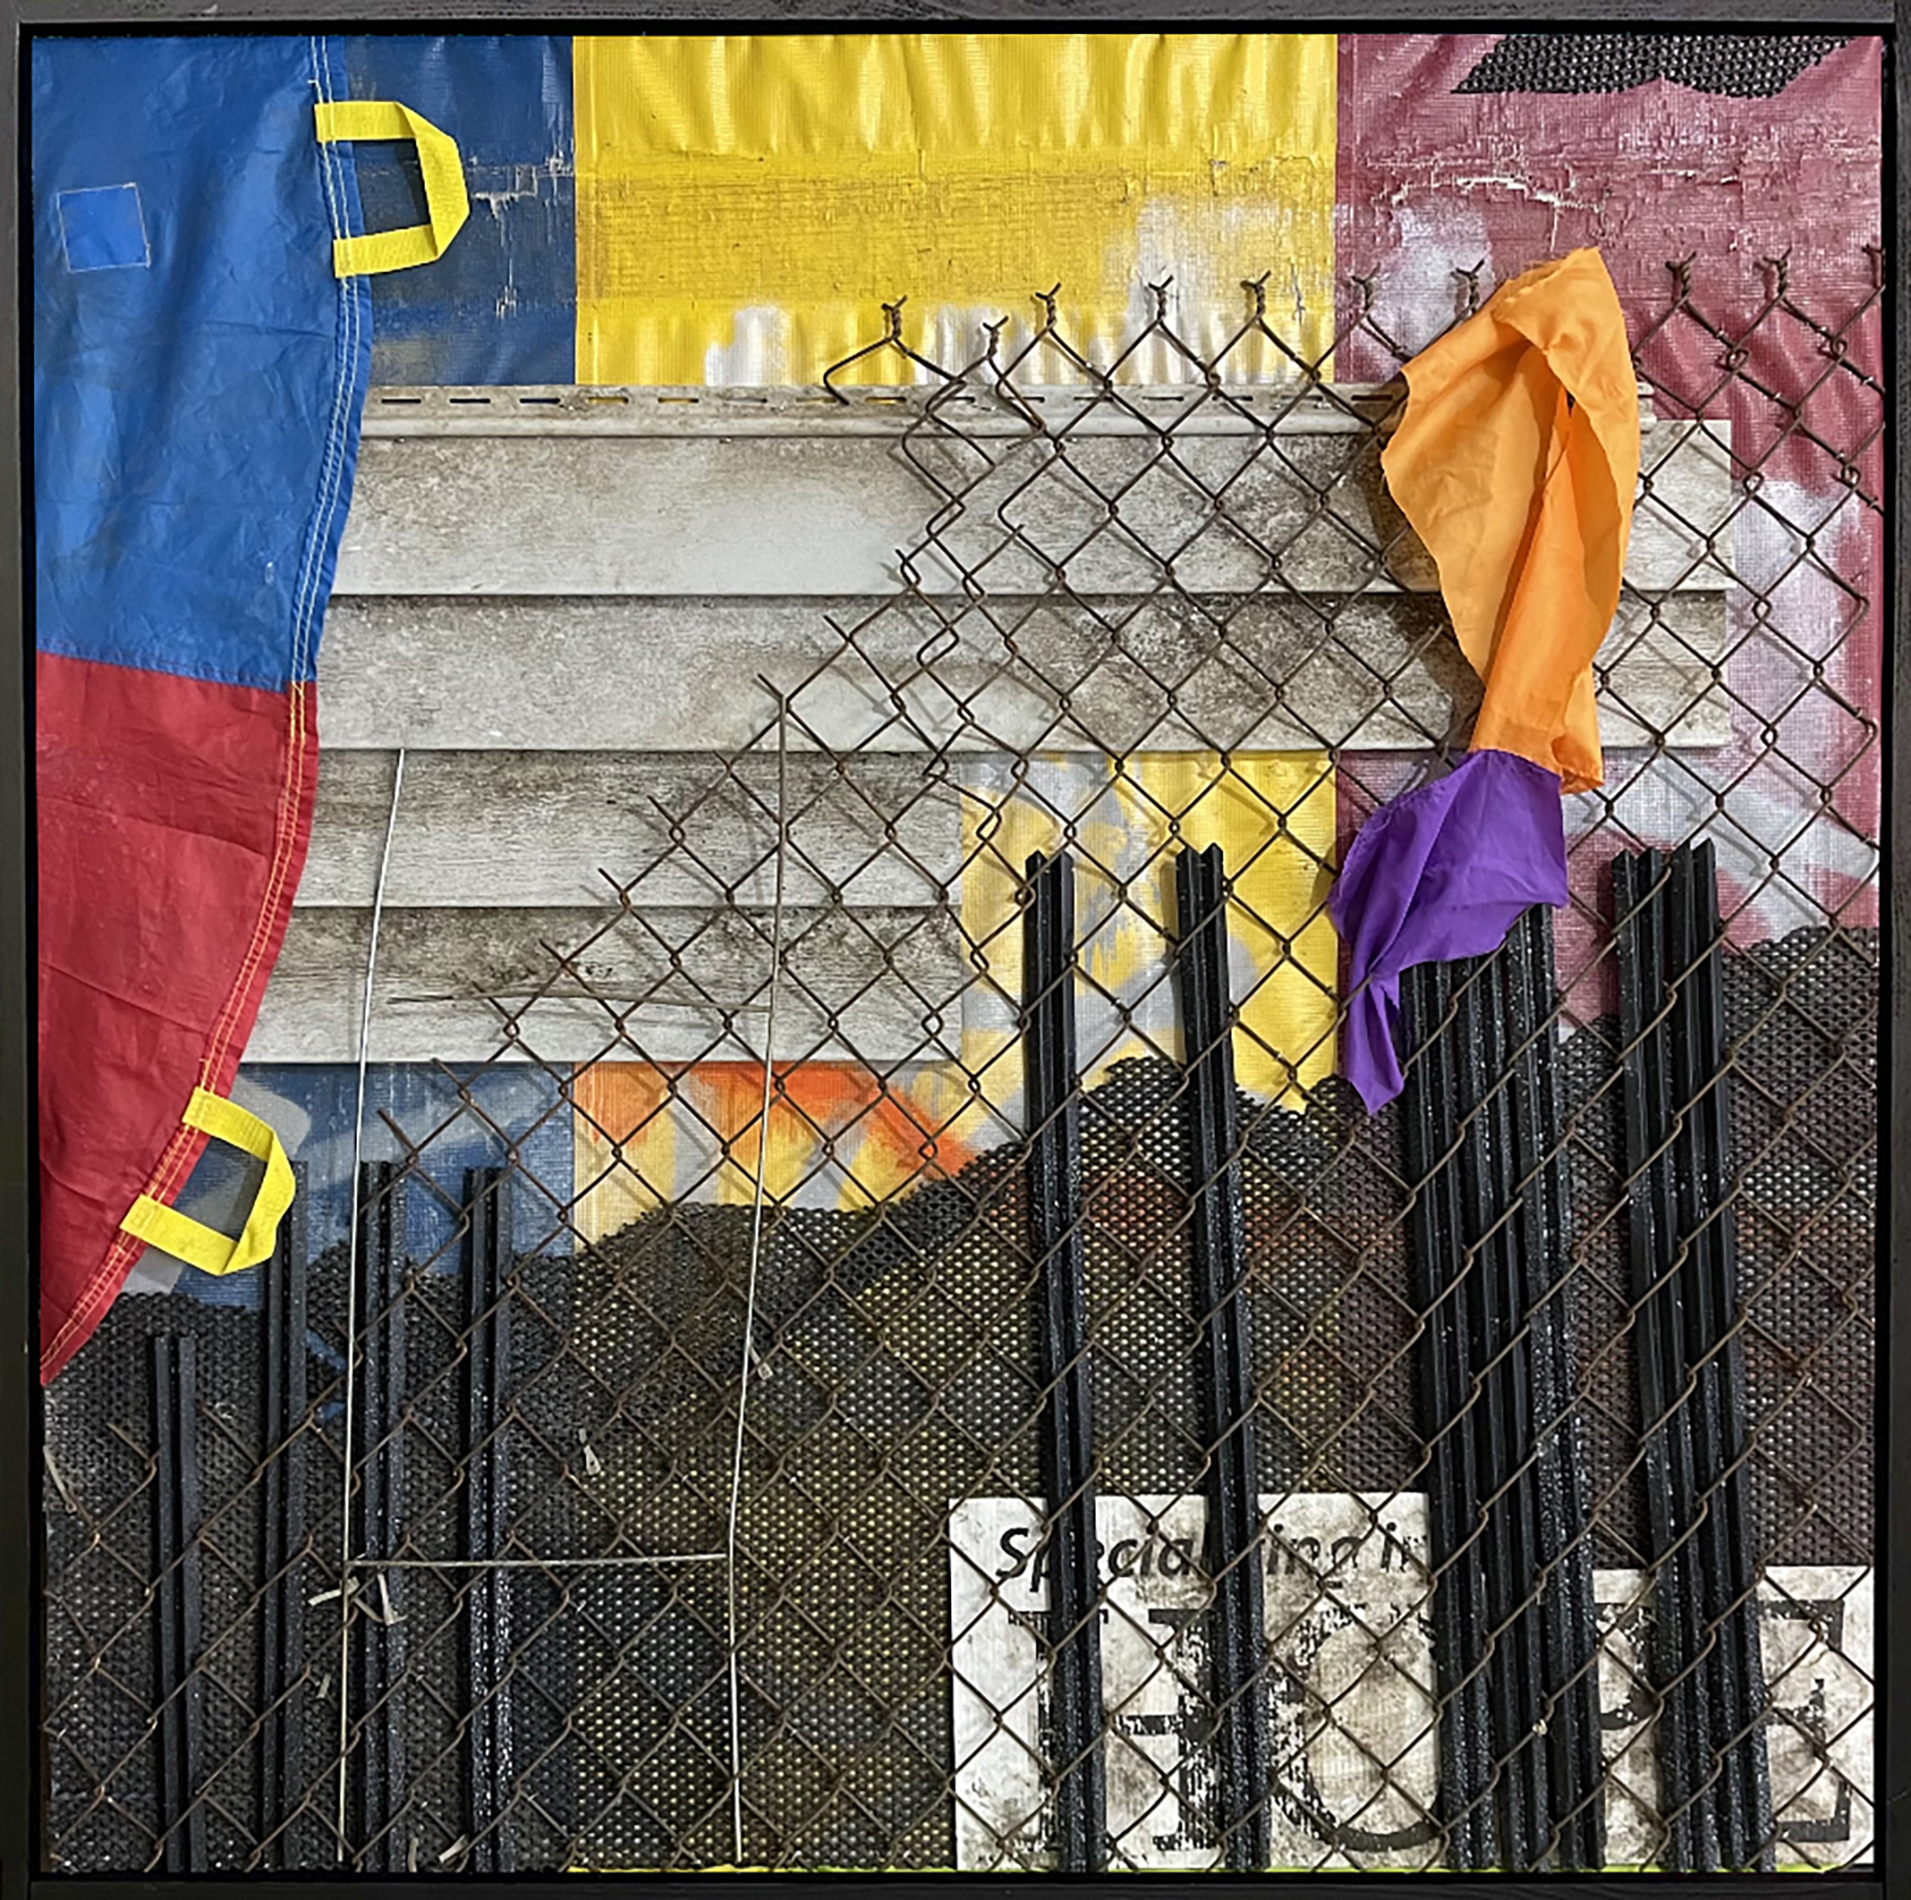 Specializing in Hope, by Aaron Coleman. A mixed media assemblage made from commercial fencing, salvaged tarps and siding, and gym parachutes.